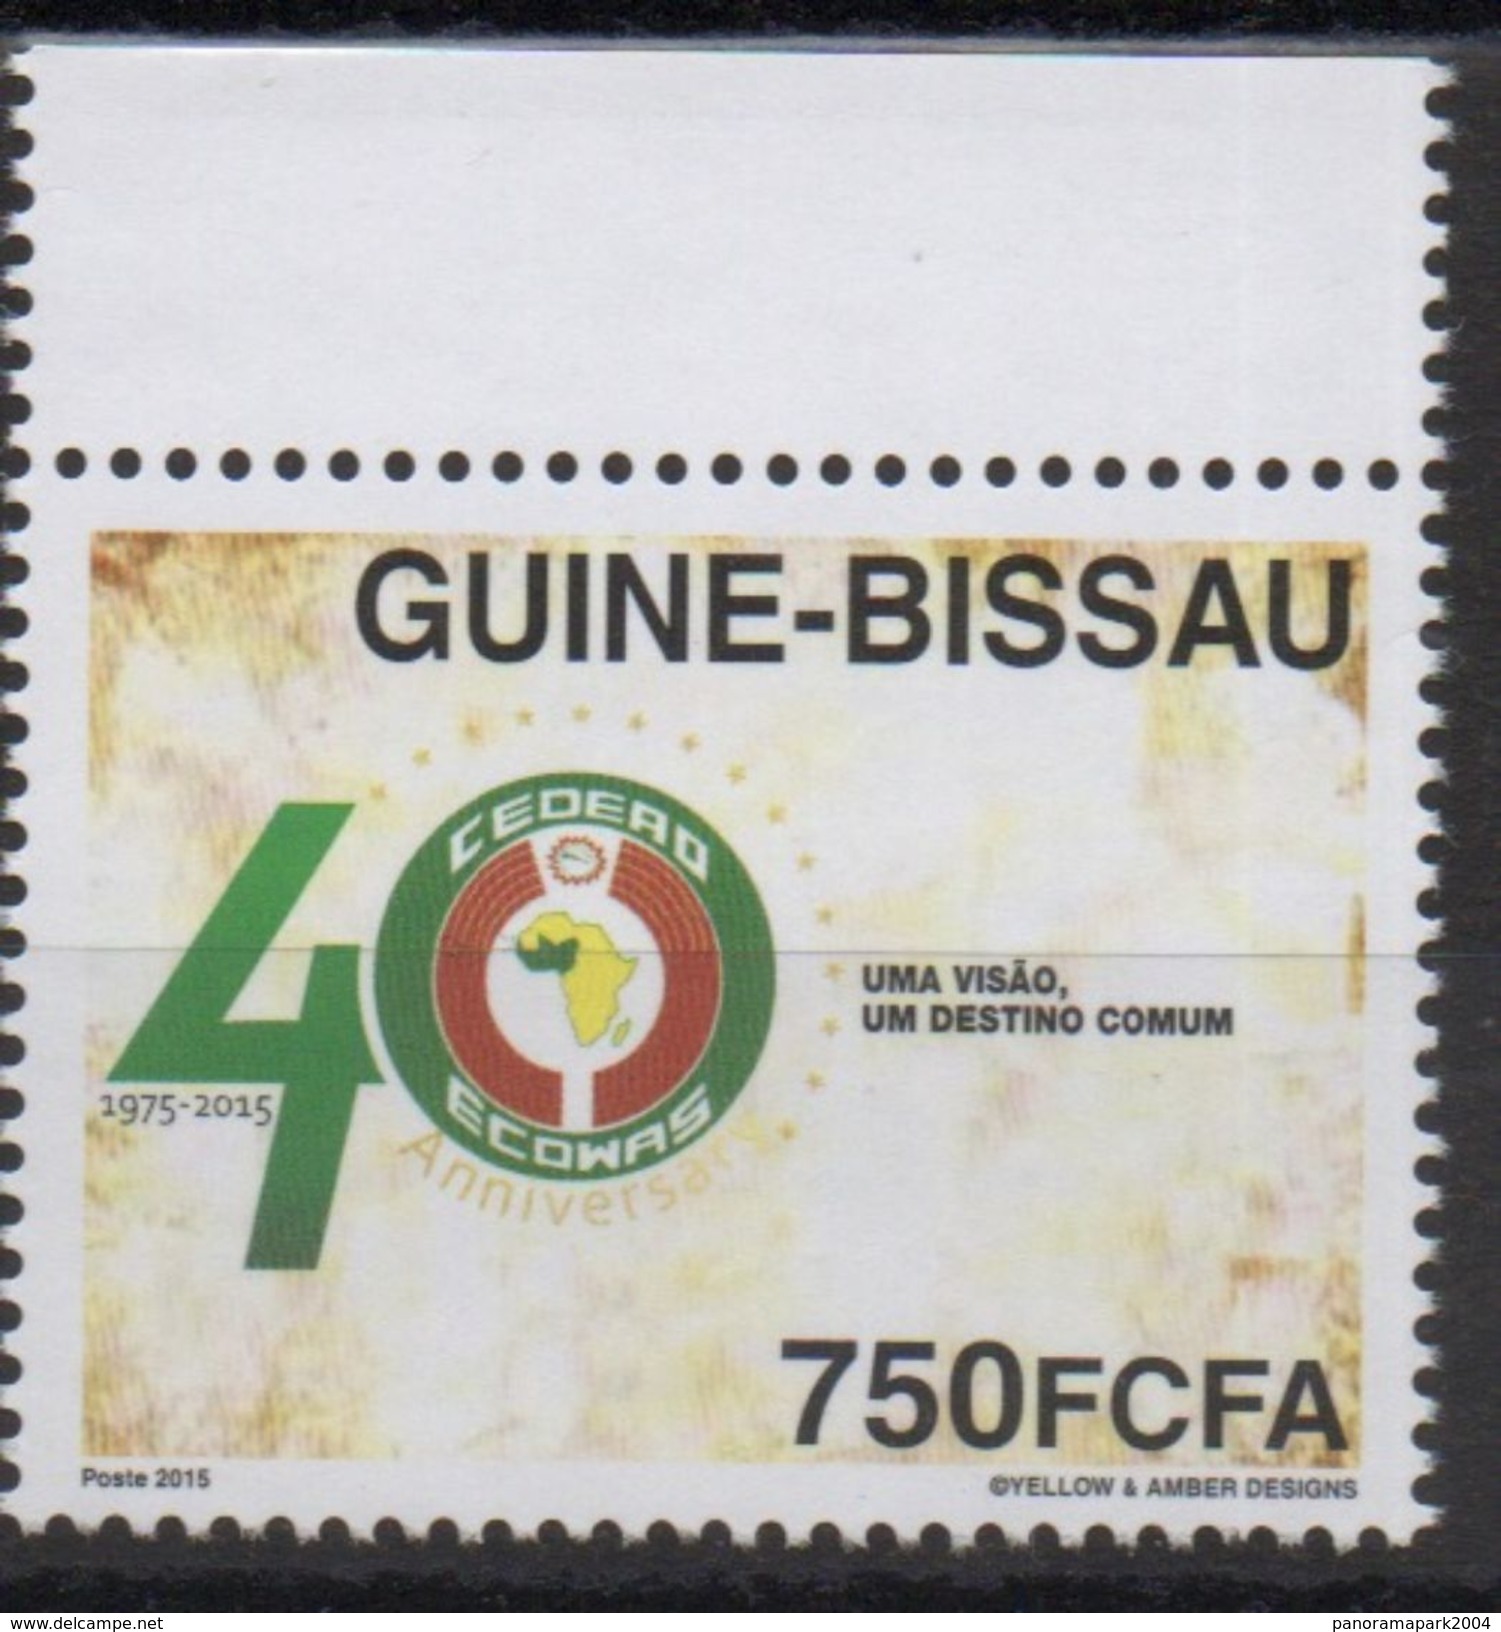 ULTRA RARE UNISSUED 750F VAL !!! Guiné-Bissau Guinea Guinée 2015 Joint Issue CEDEAO ECOWAS - Joint Issues